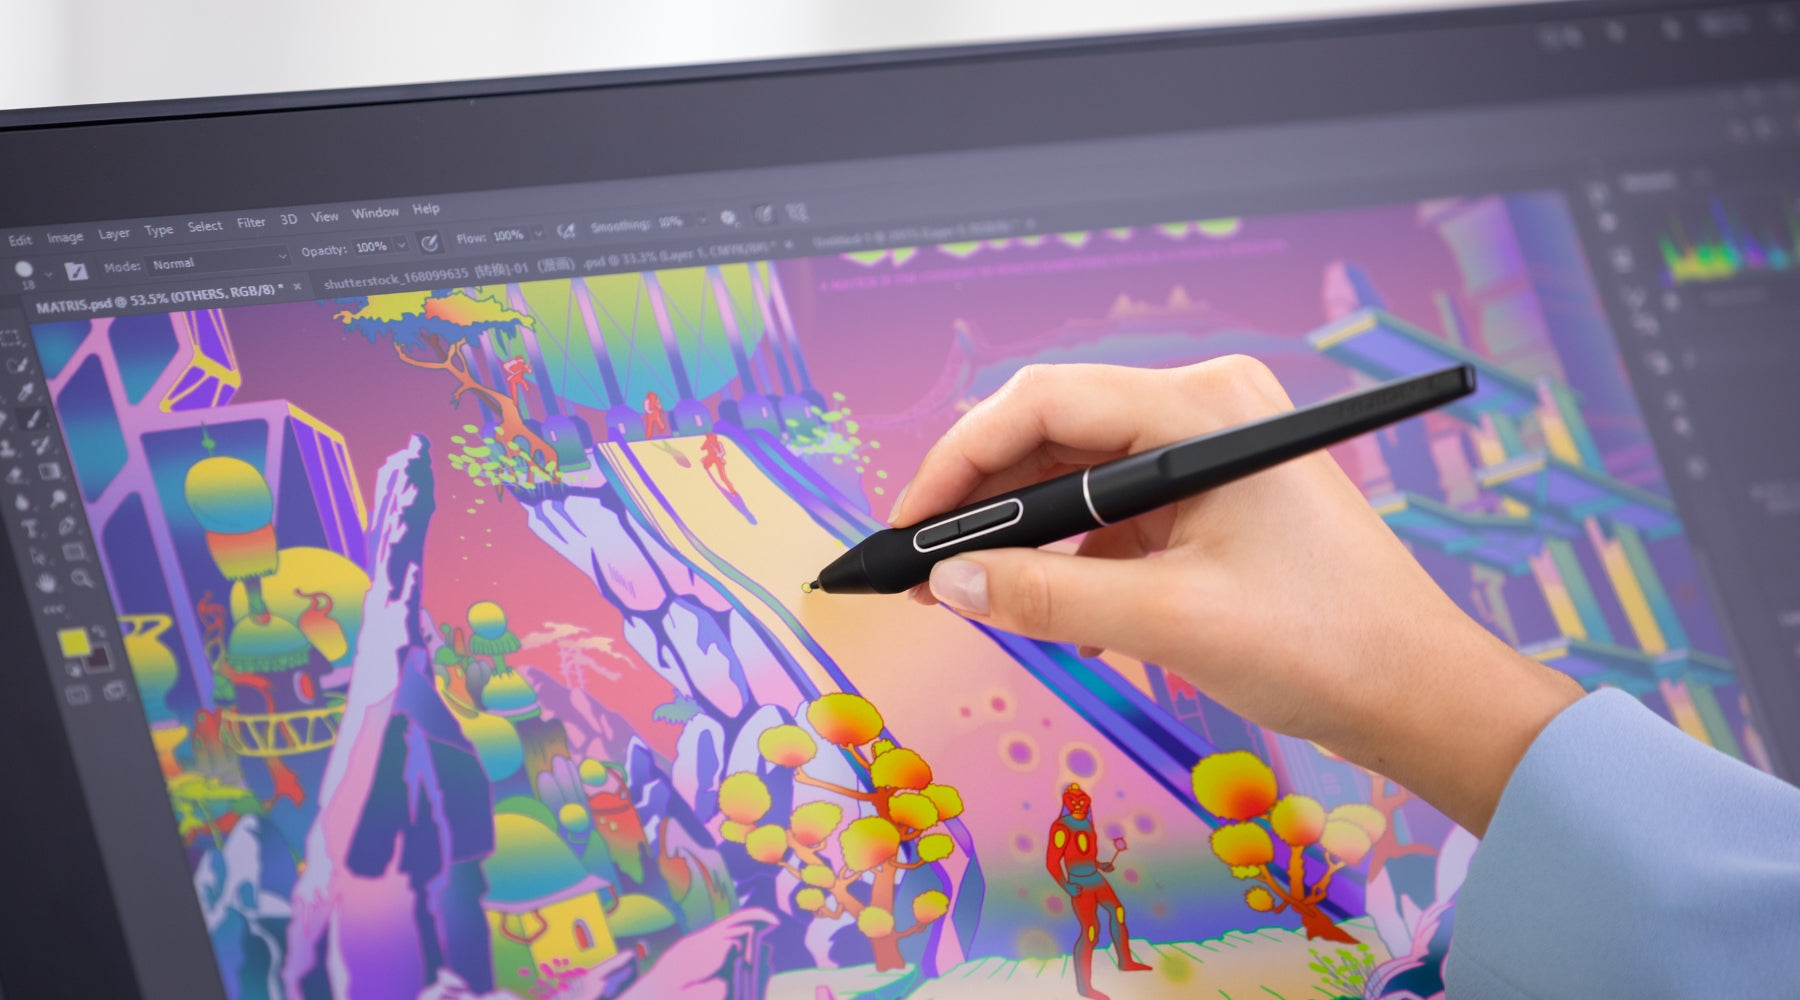 Huion Graphic Tablets: The Ultimate Tool for Digital Artists